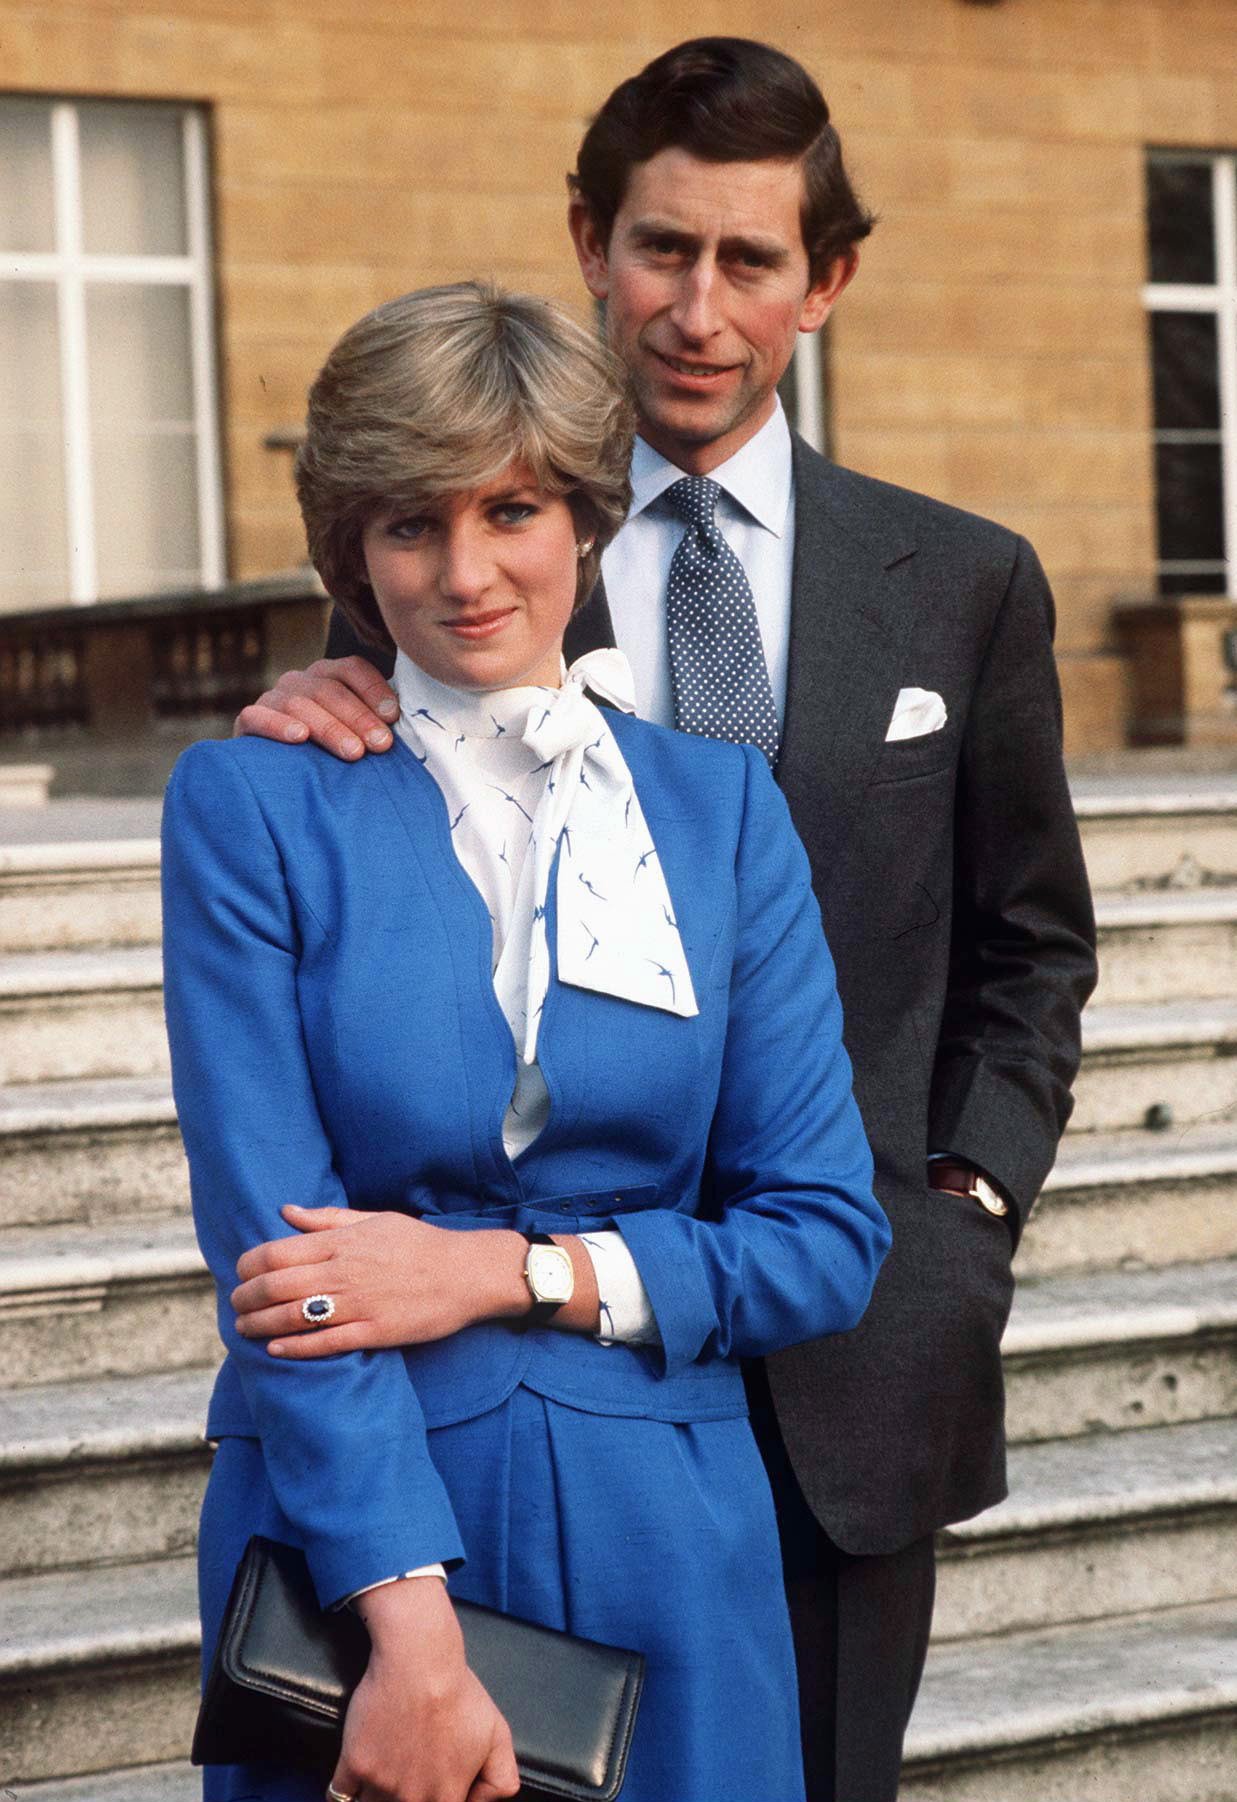 Princess Diana and King Charles III in London in 1981. | Source: Getty Images